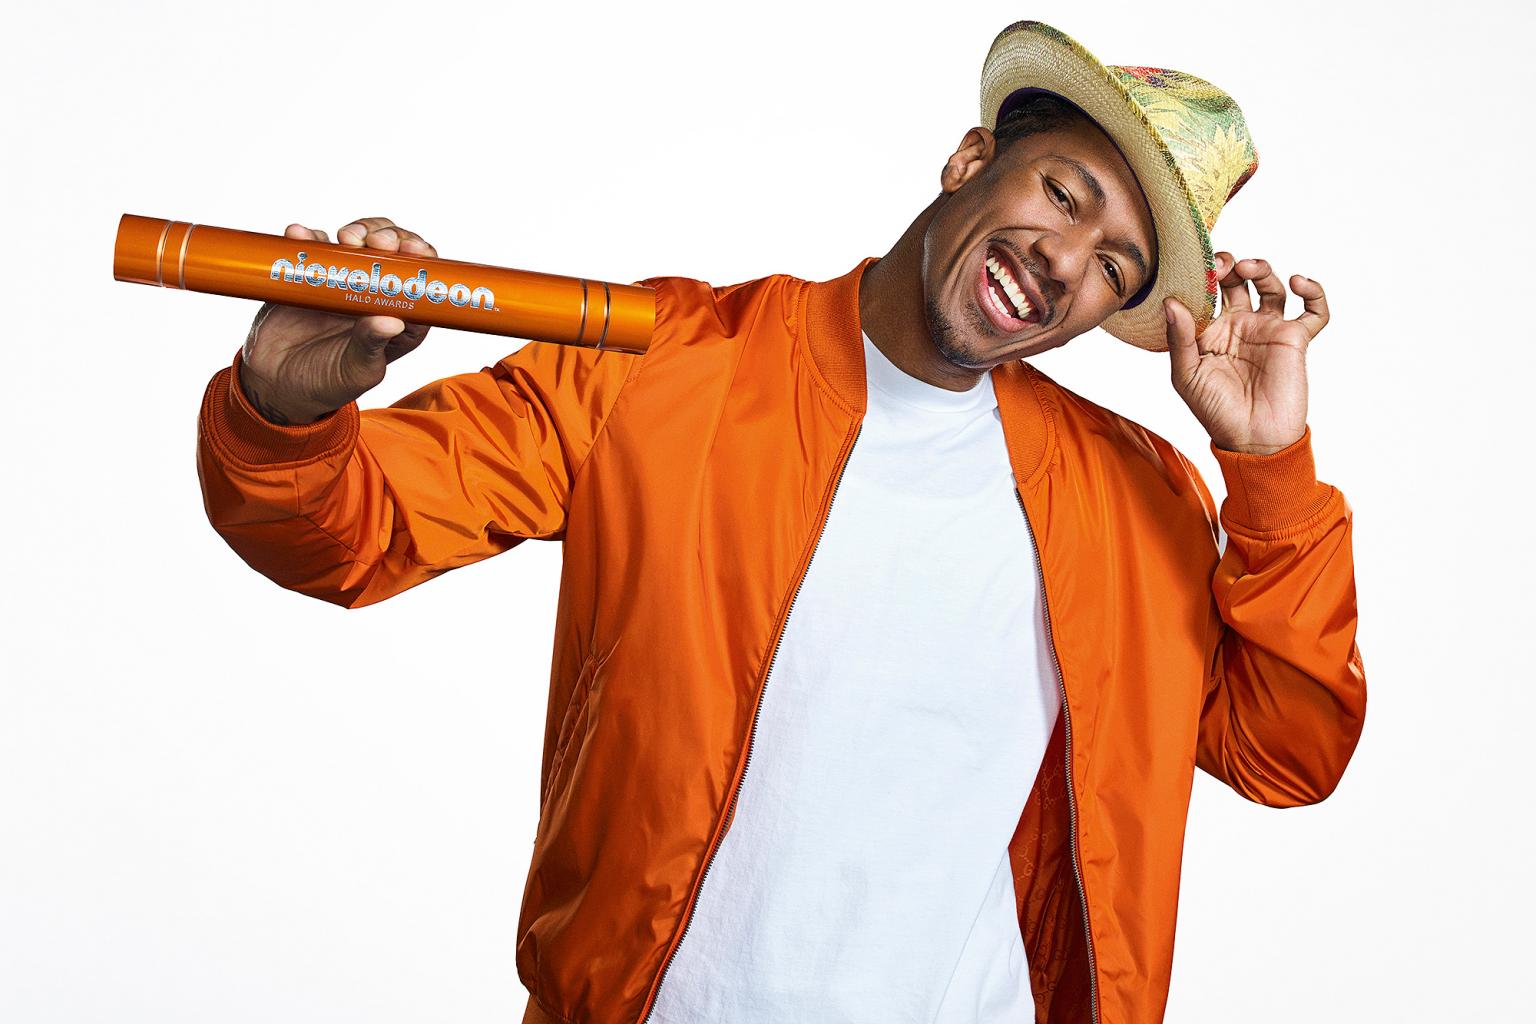 Nick Cannon Set to Host 2016 Nickelodeon Halo Awards